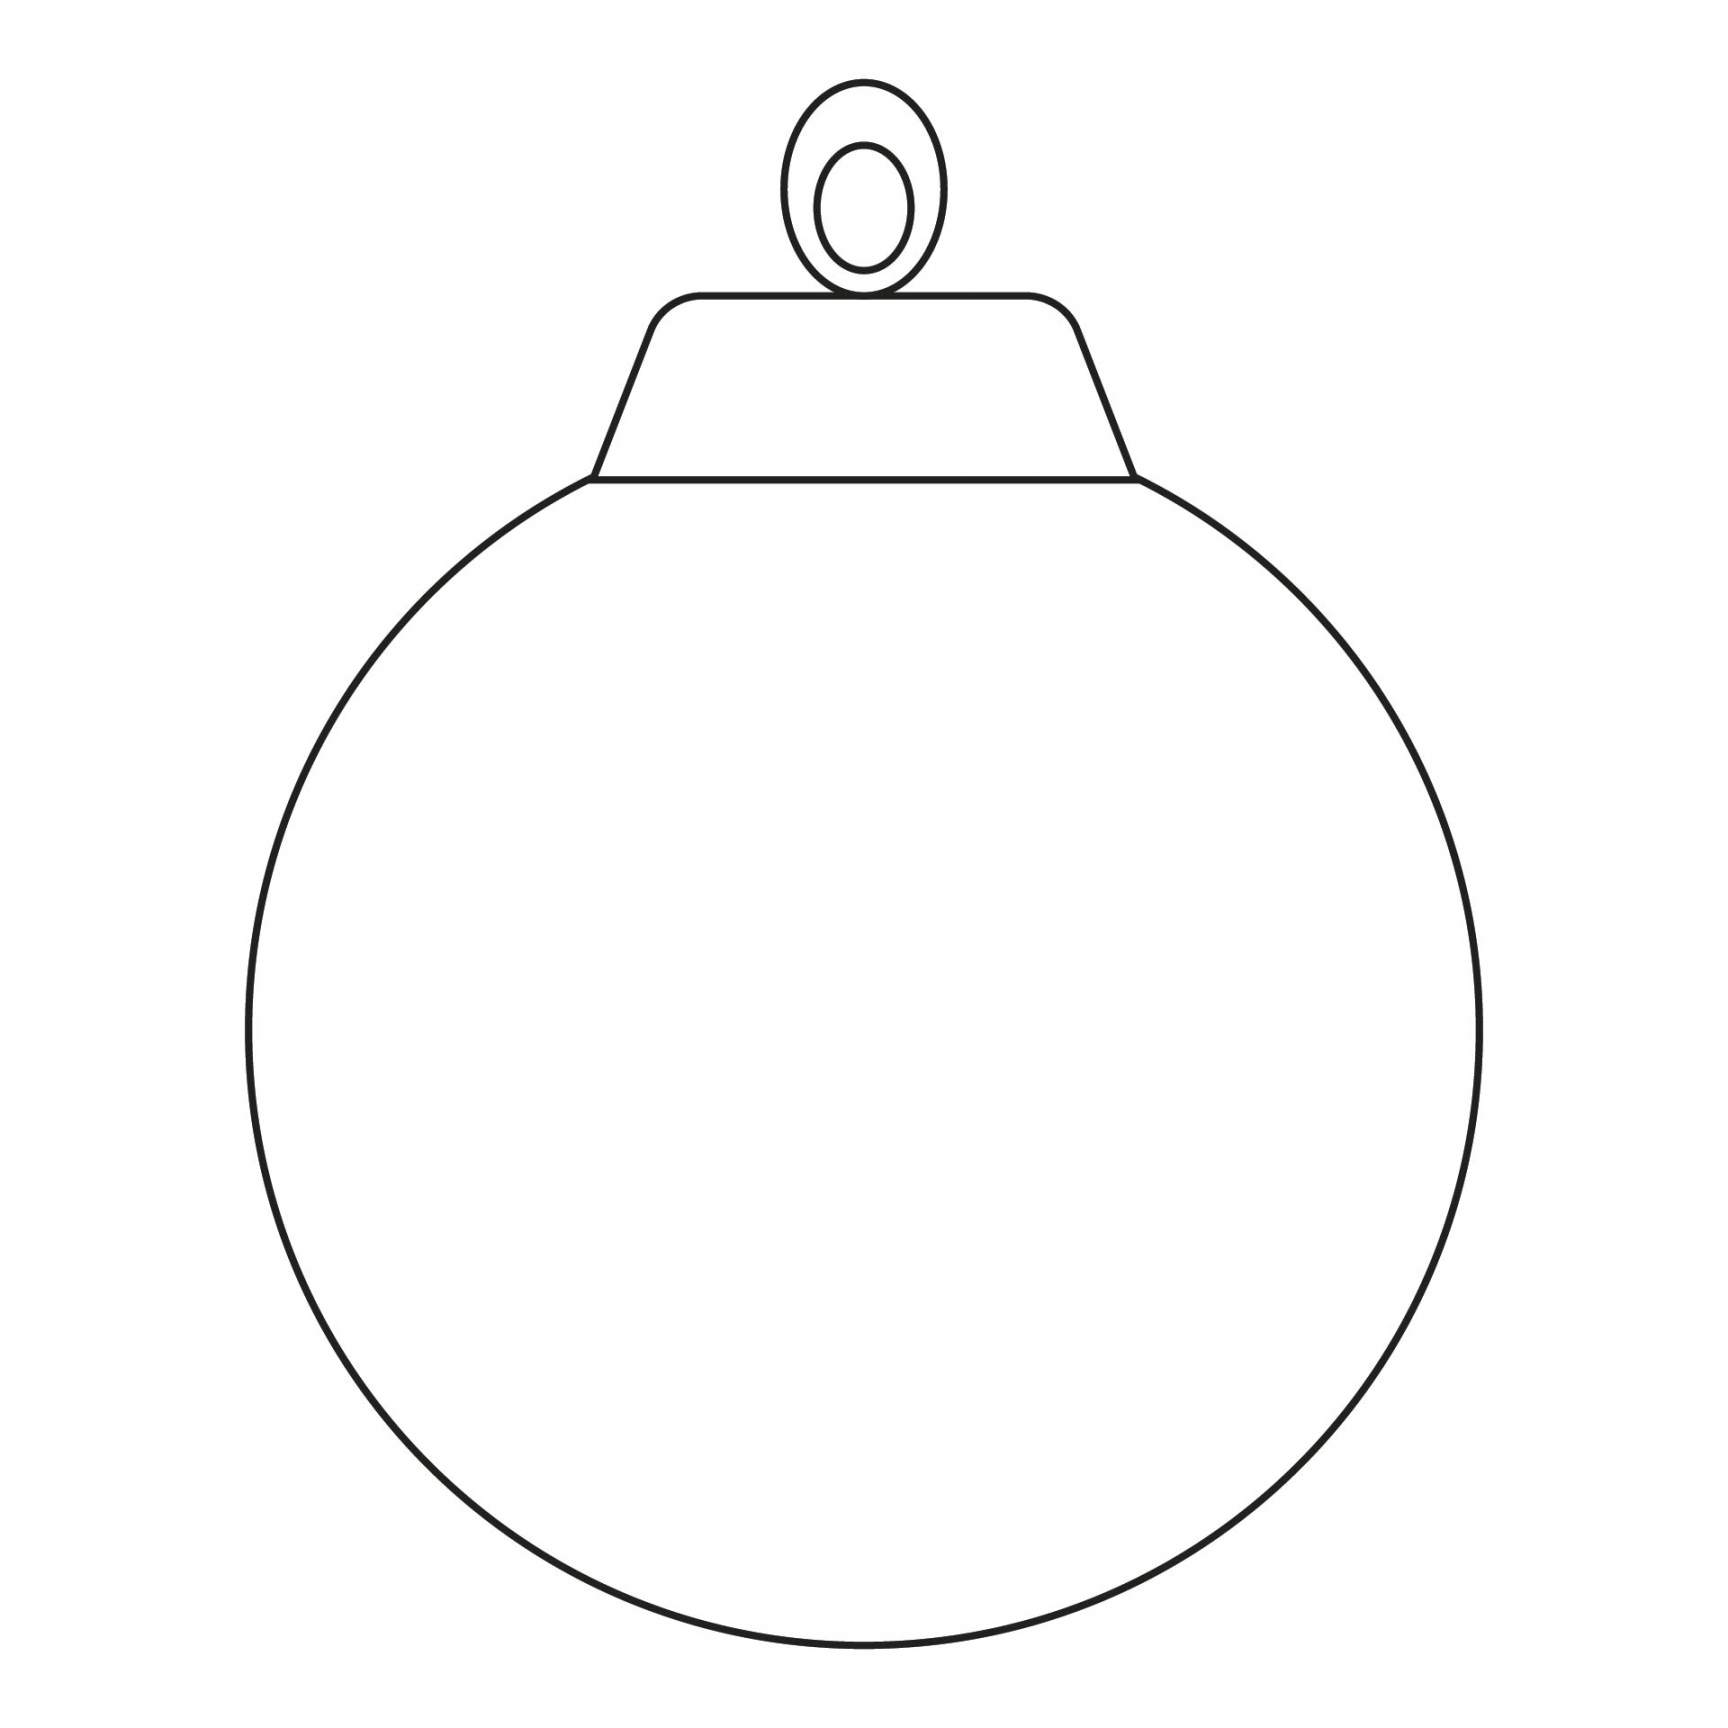 Blank Ornament Template: Design Your Own Festive Decor - All FREE ...